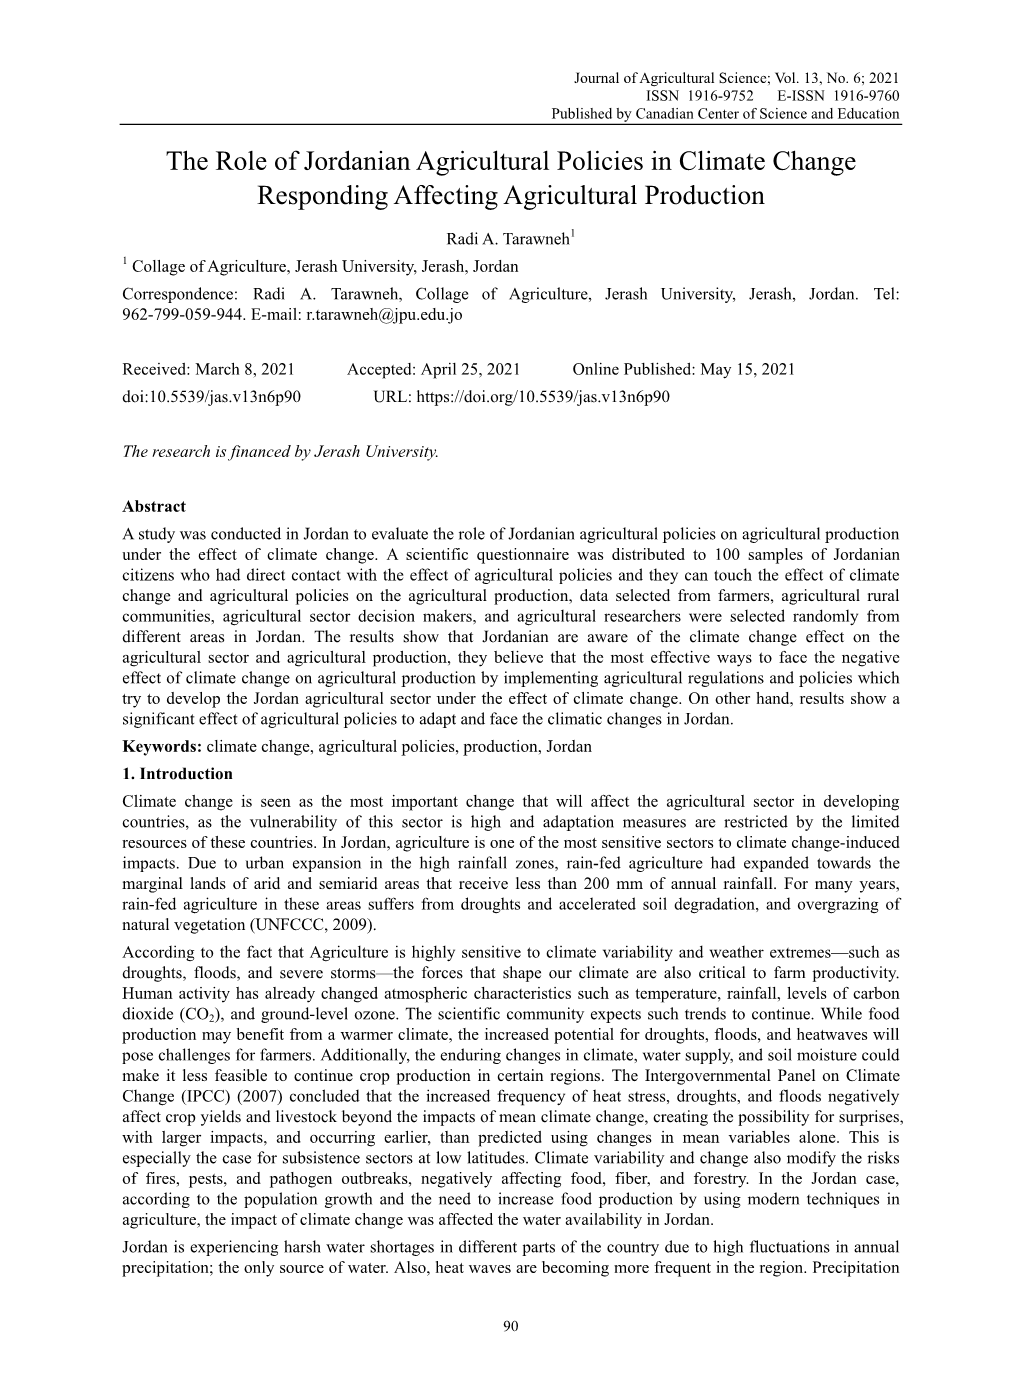 The Role of Jordanian Agricultural Policies in Climate Change Responding Affecting Agricultural Production